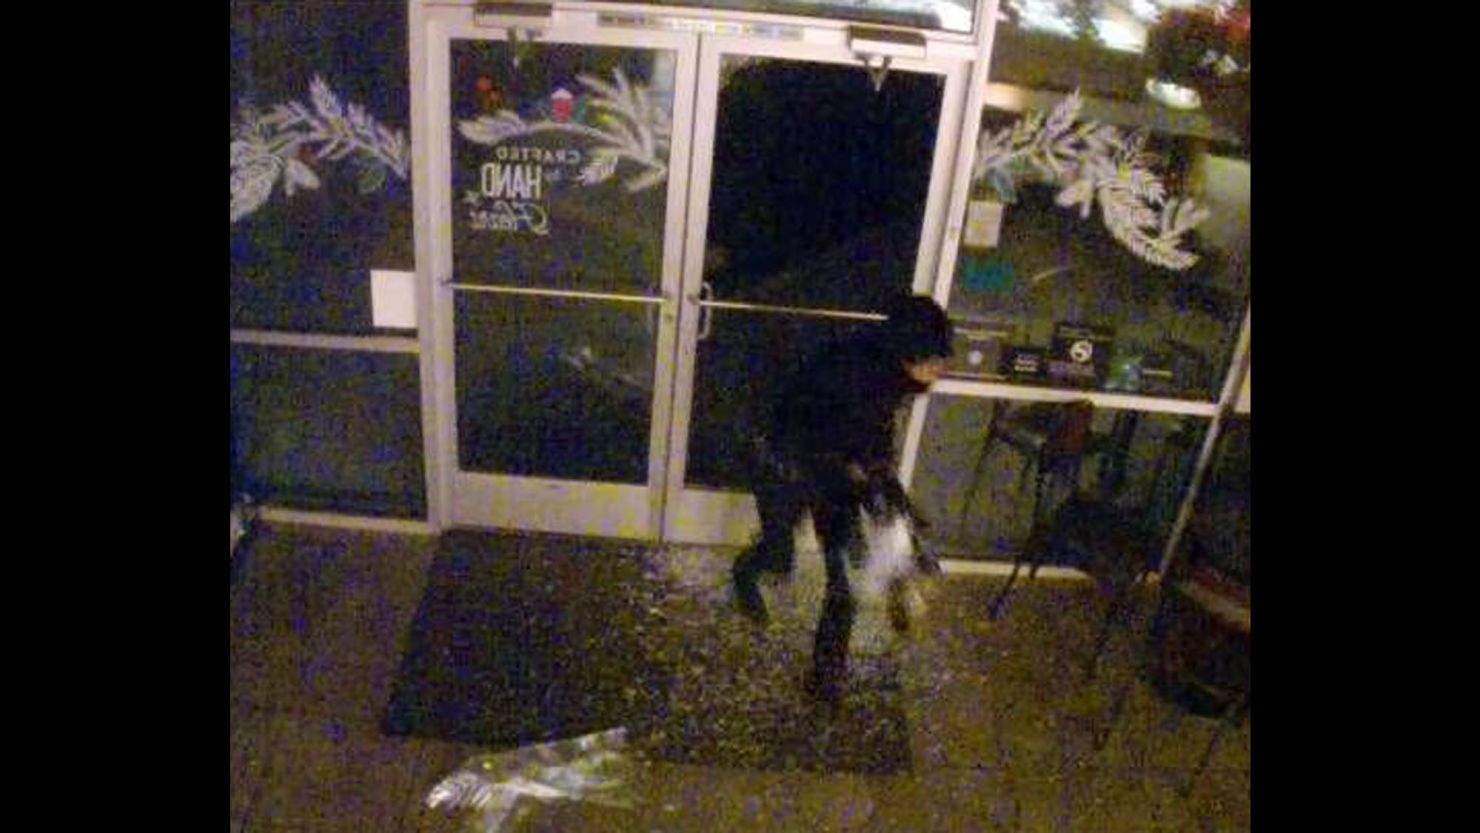 The FBI is investigating the Starbucks vandalism and released this image.